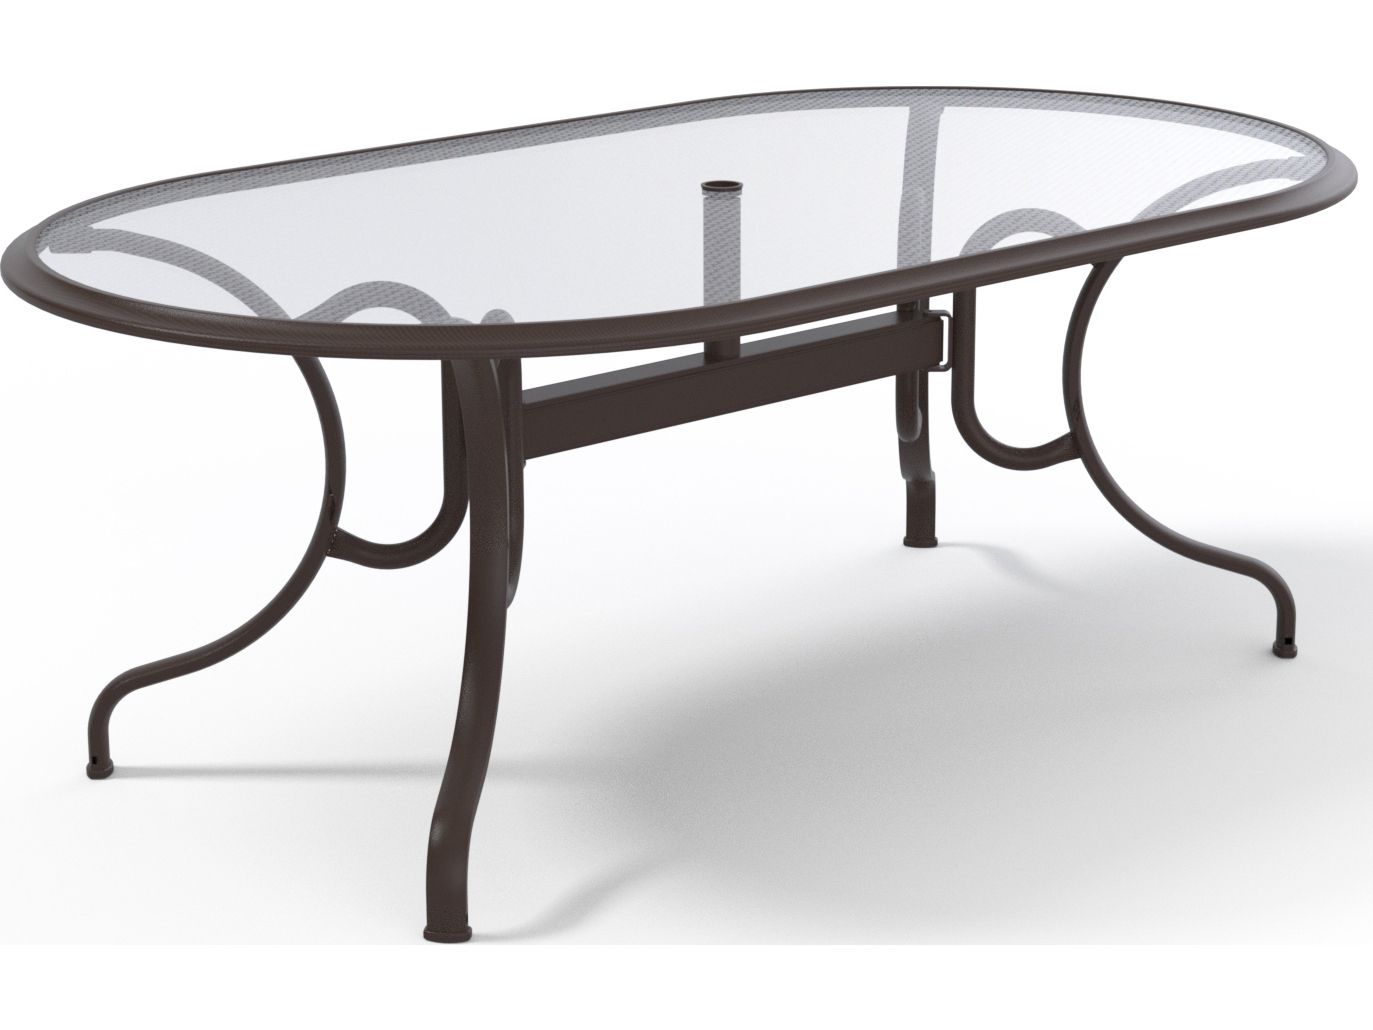 Tc3460 Intended For Most Current Glass Oval Outdoor Tables (View 8 of 15)